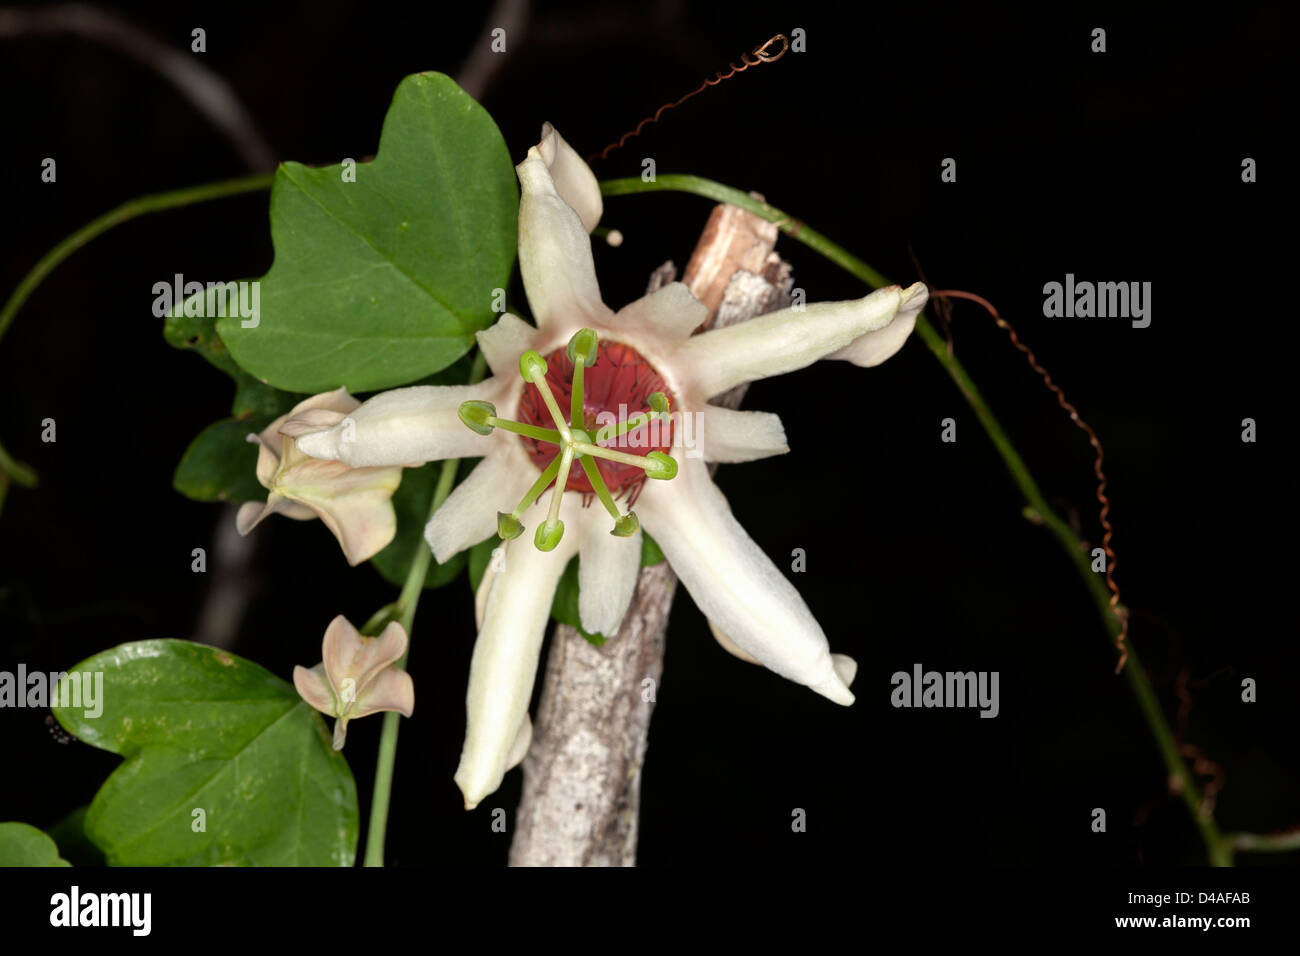 White flower and bright green foliage of Passiflora aurantia - Australian native passionflower - against a dark background Stock Photo